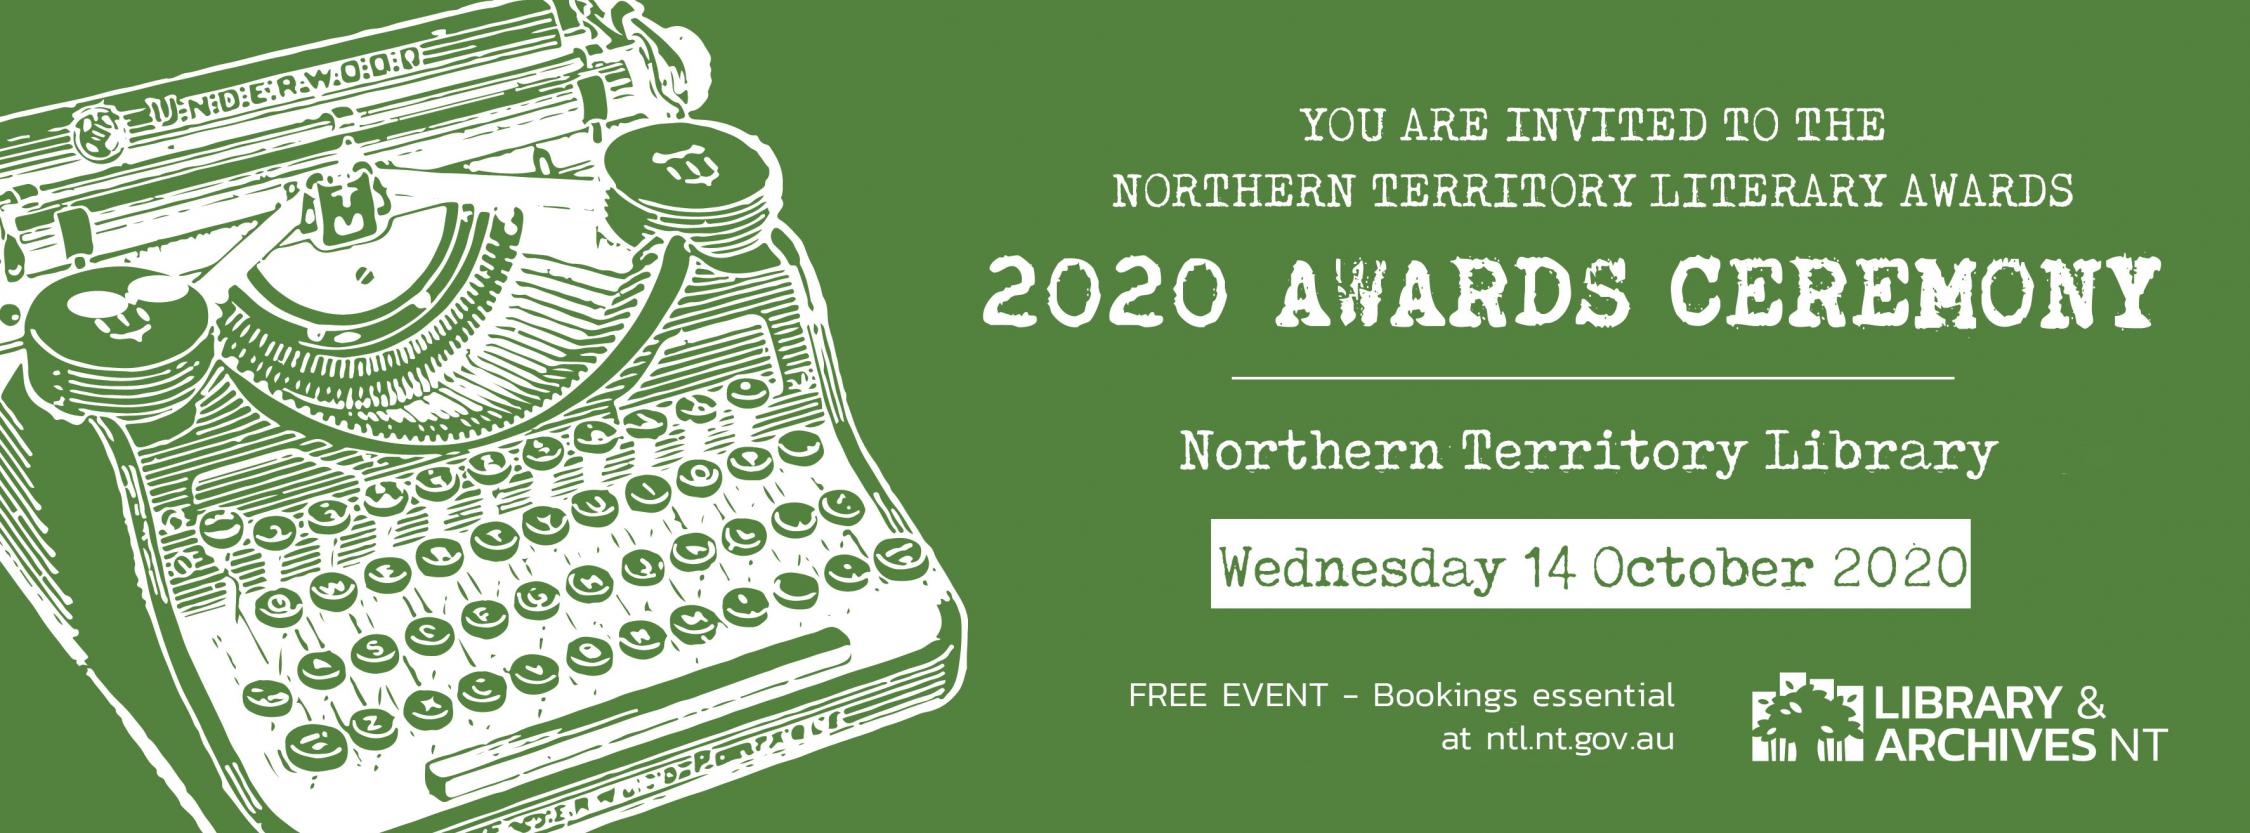 Green banner detailing the event details for the 2020 NT Literary Awards